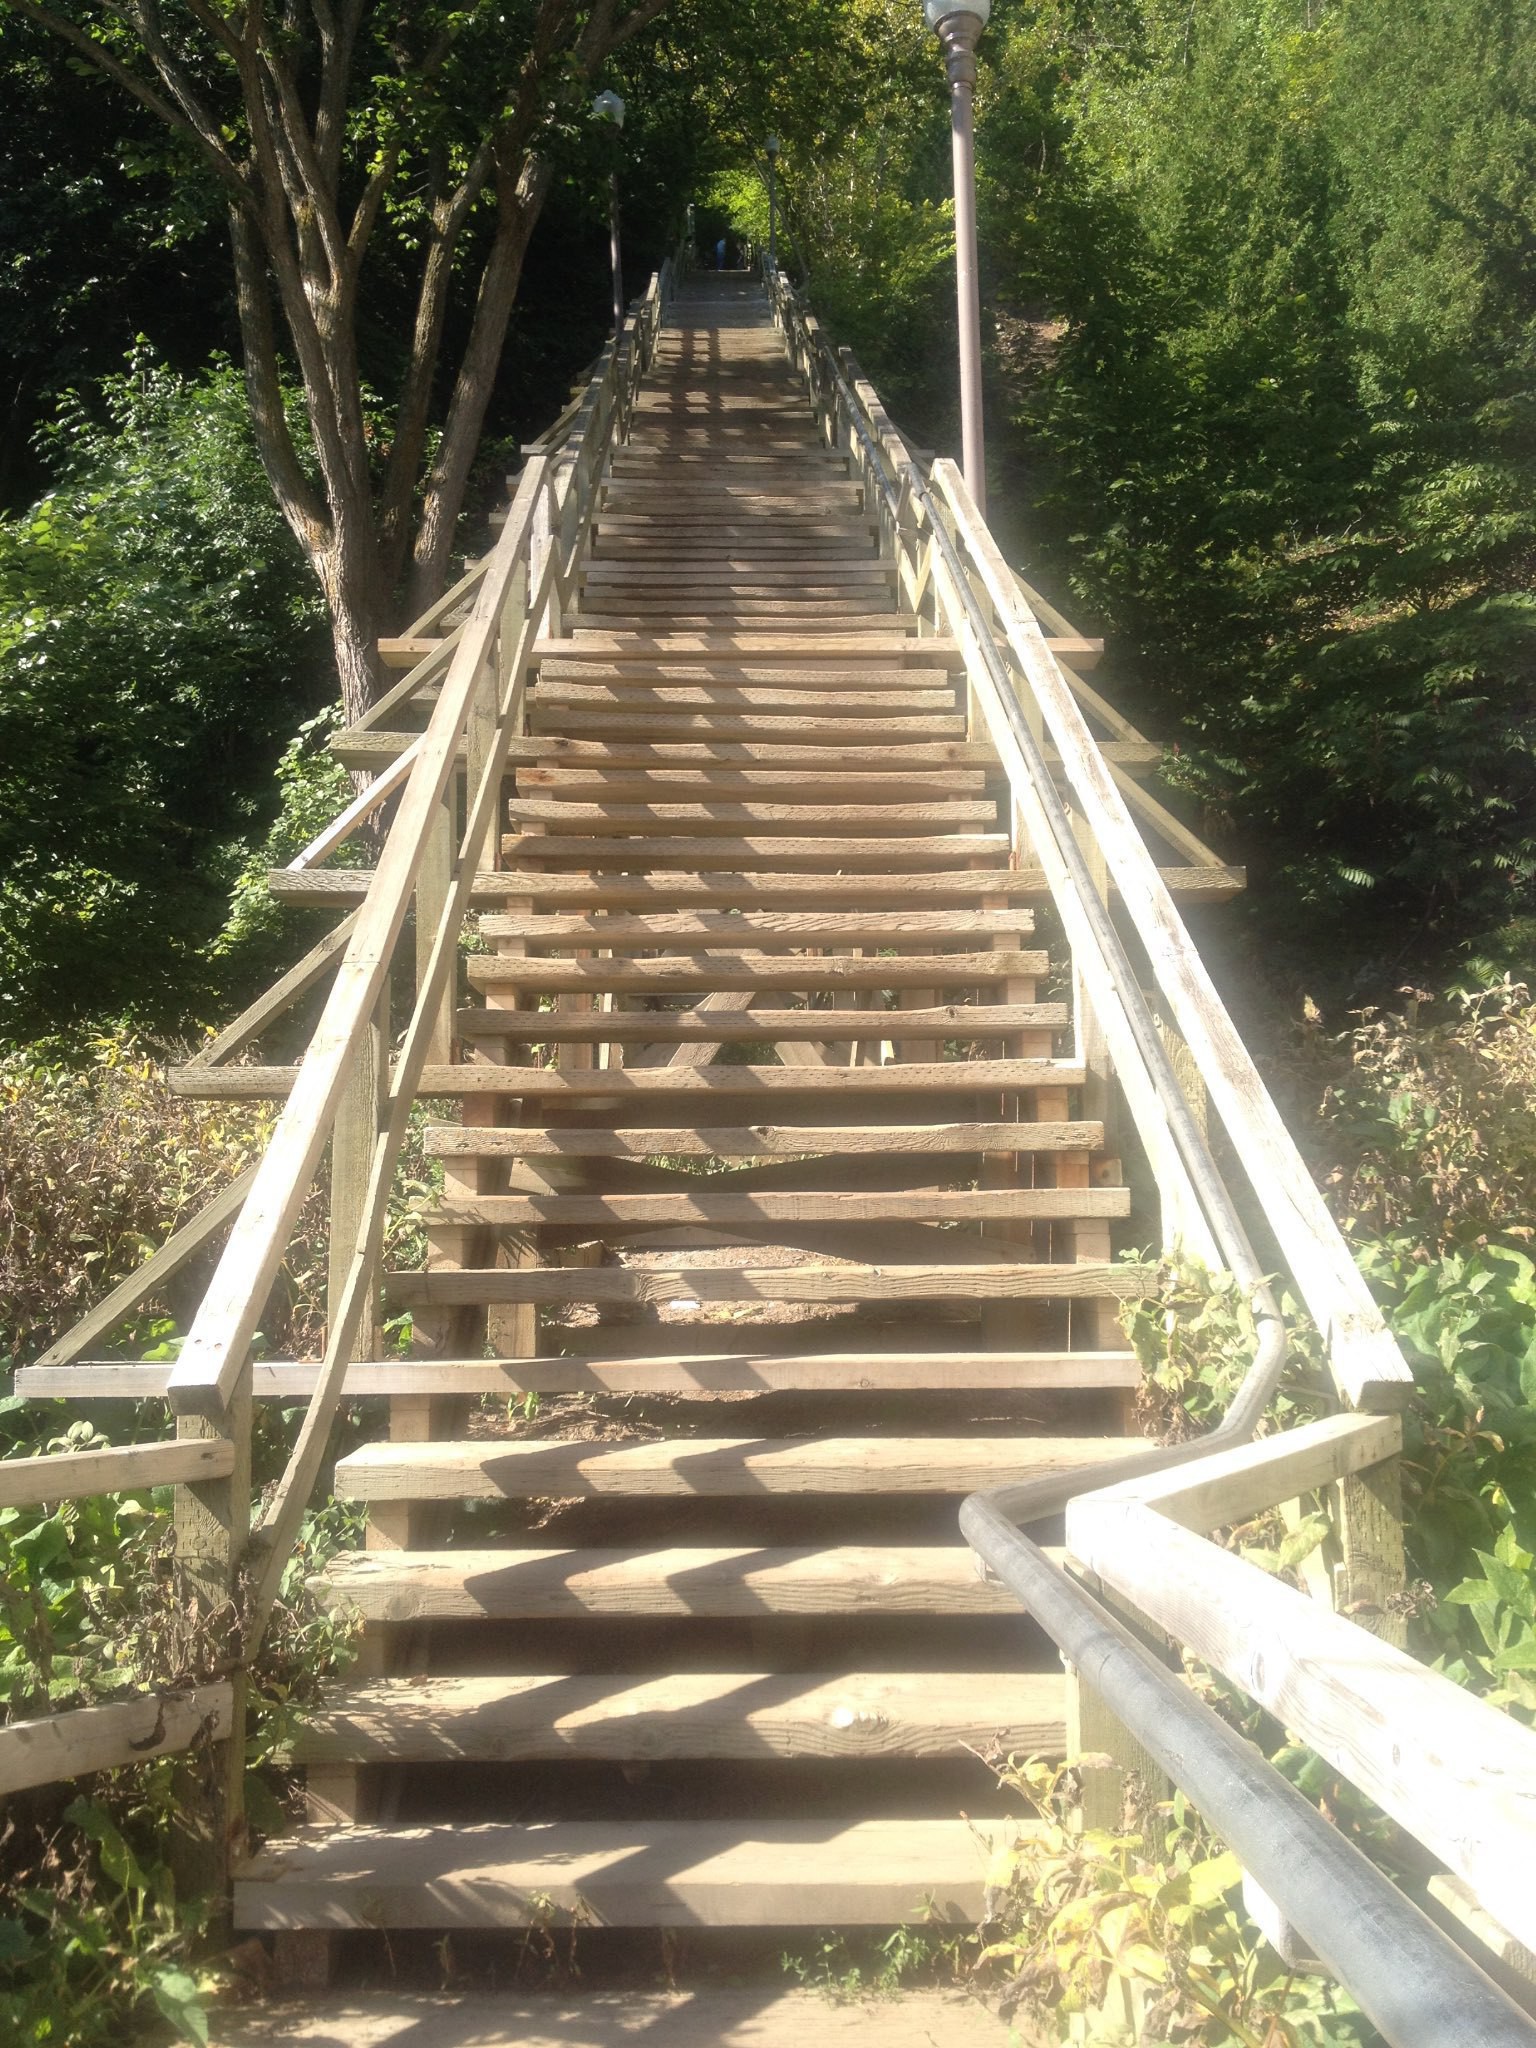 Looking up a long set of wooden steps disappearing into a forest on a sunny summer day.